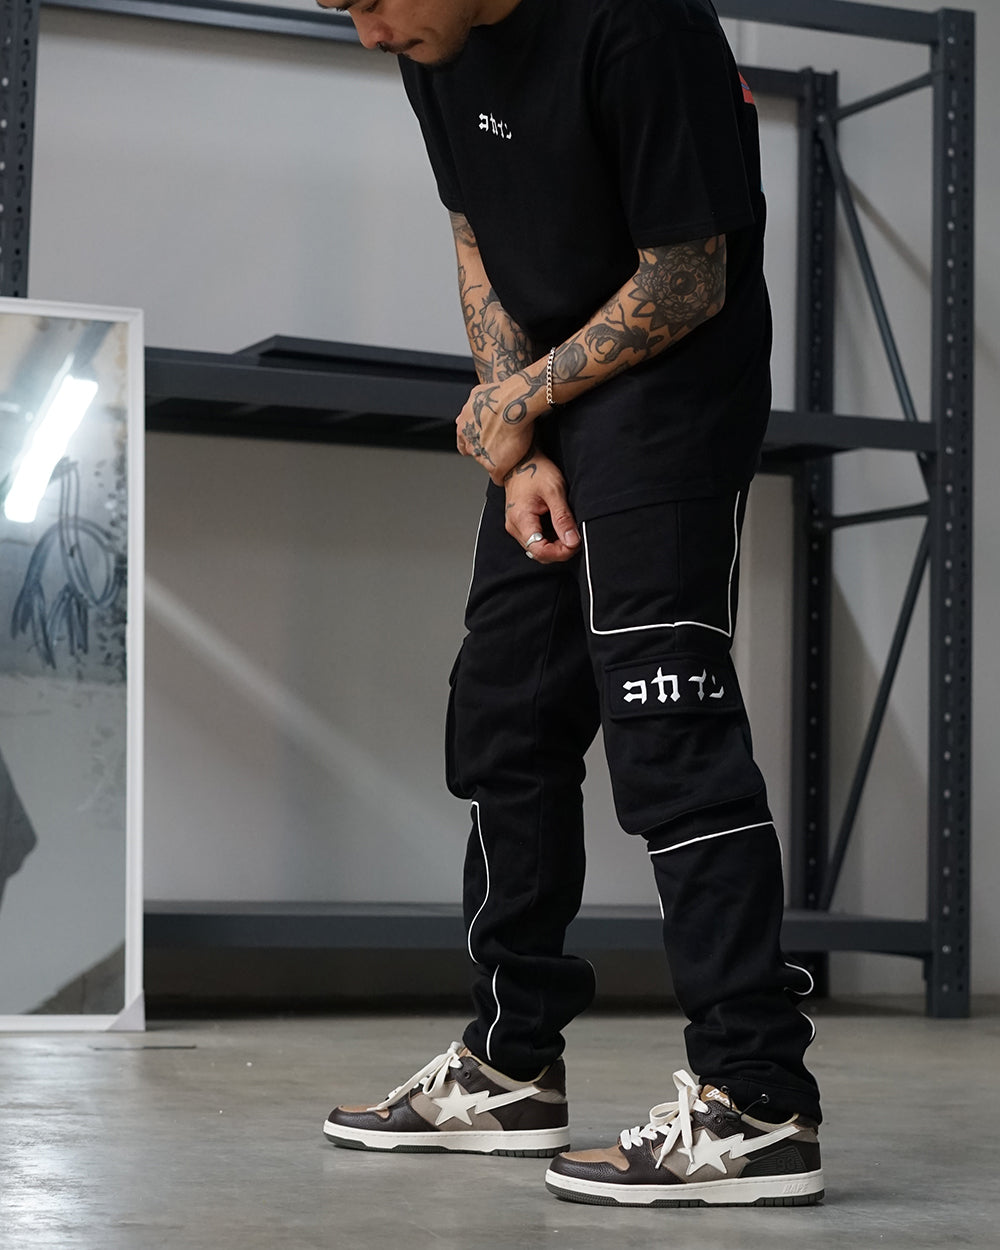 "3M" Piping Trackie Pants ///